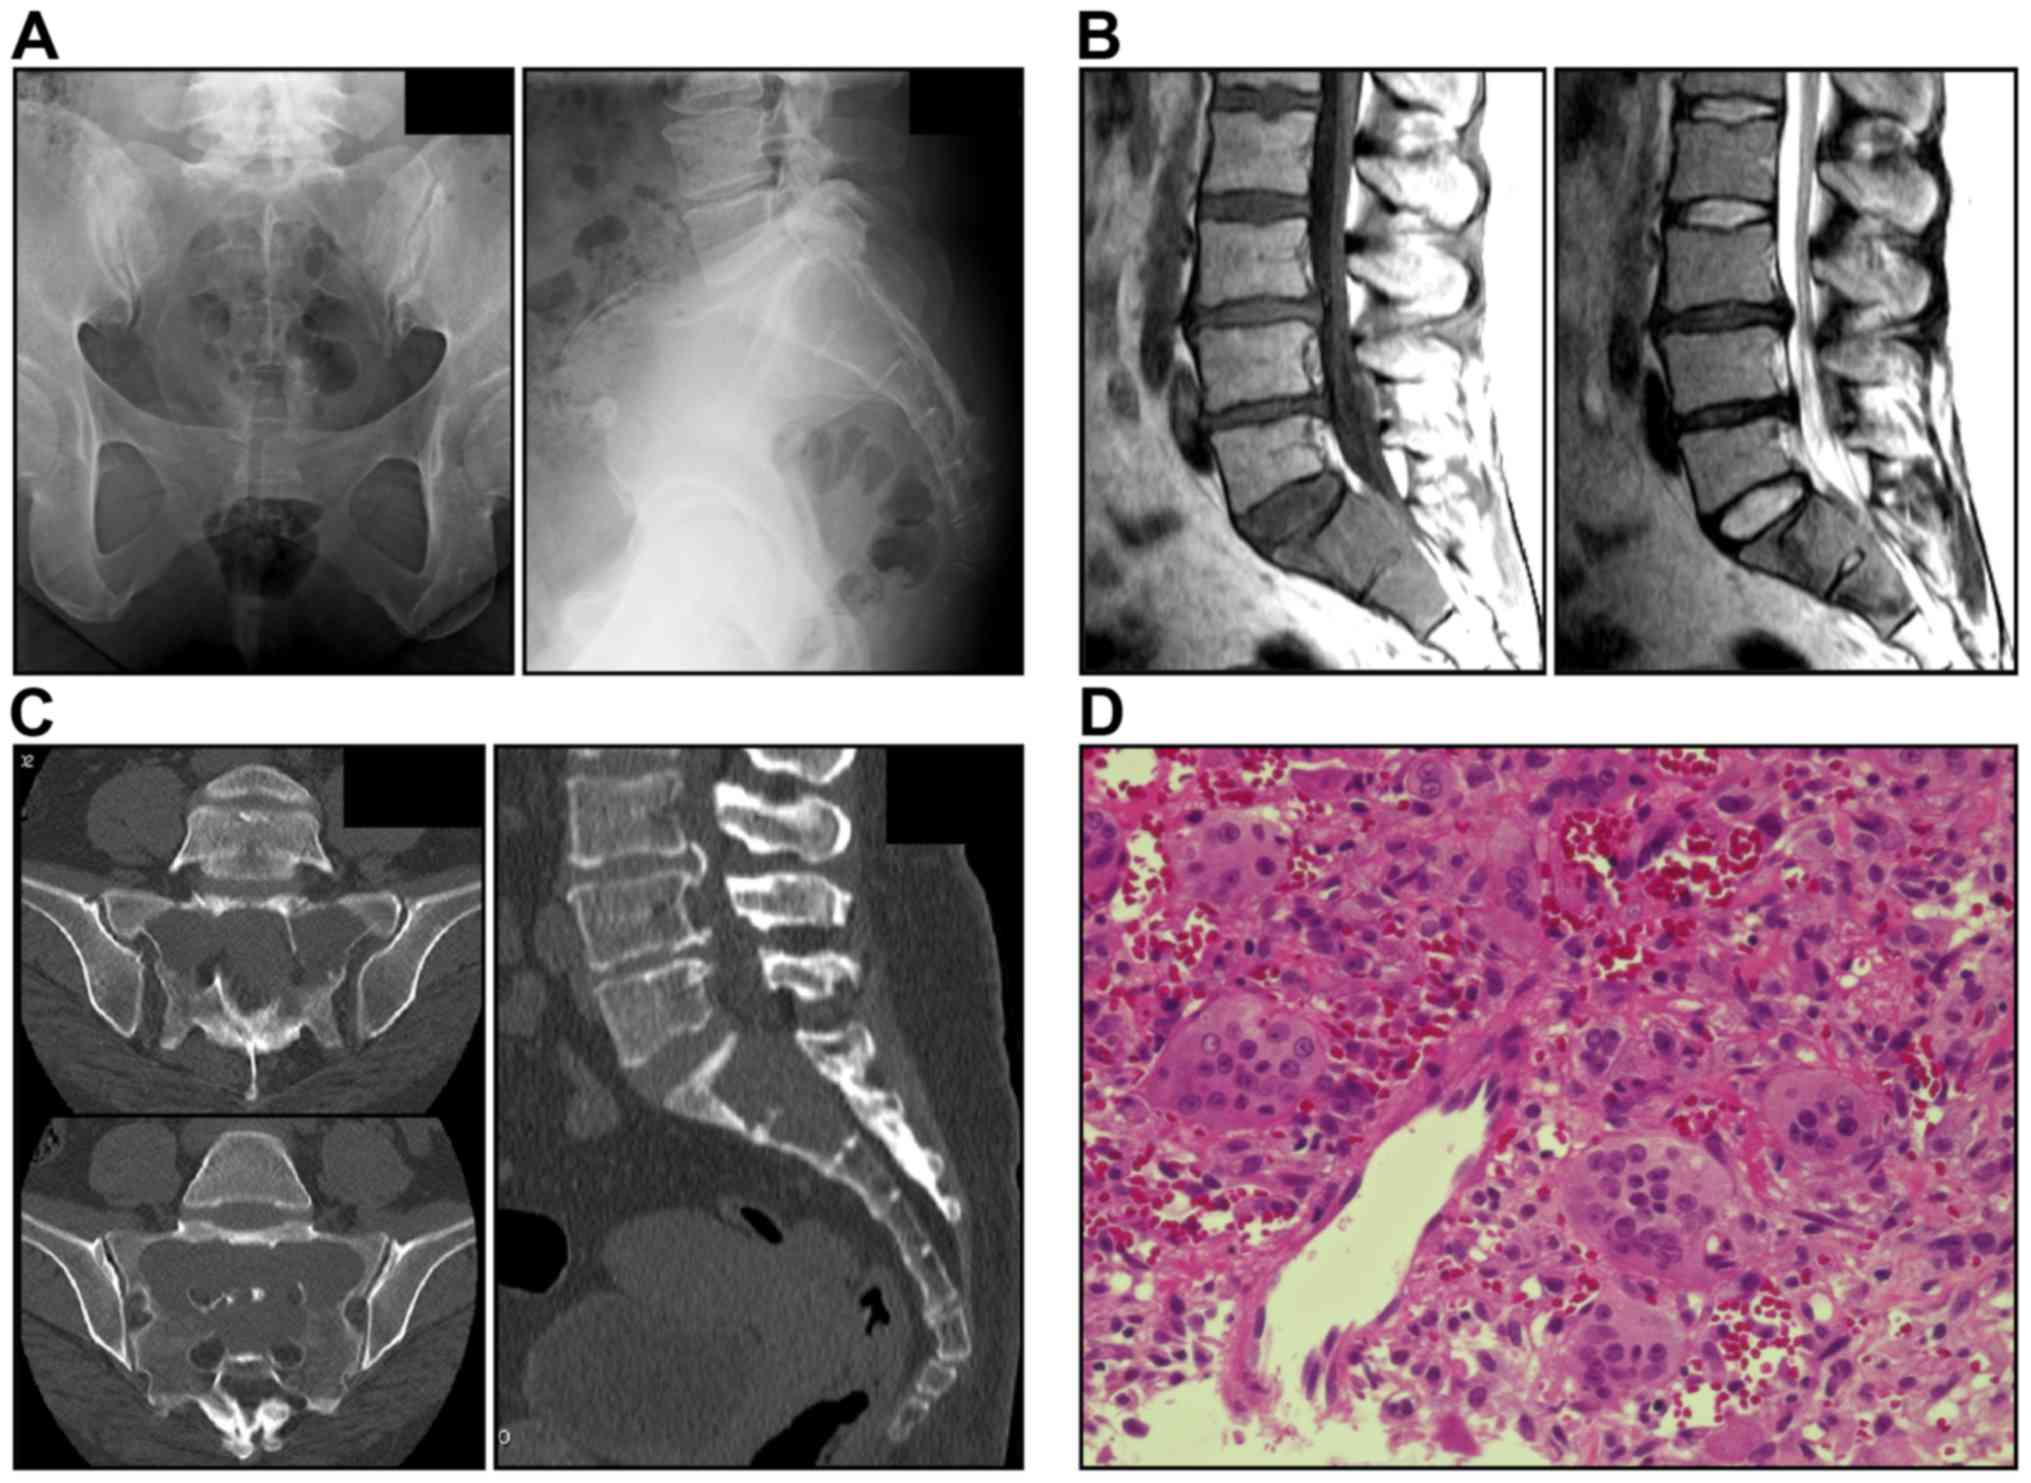 Successful treatment with denosumab in a patient with sacral giant cell